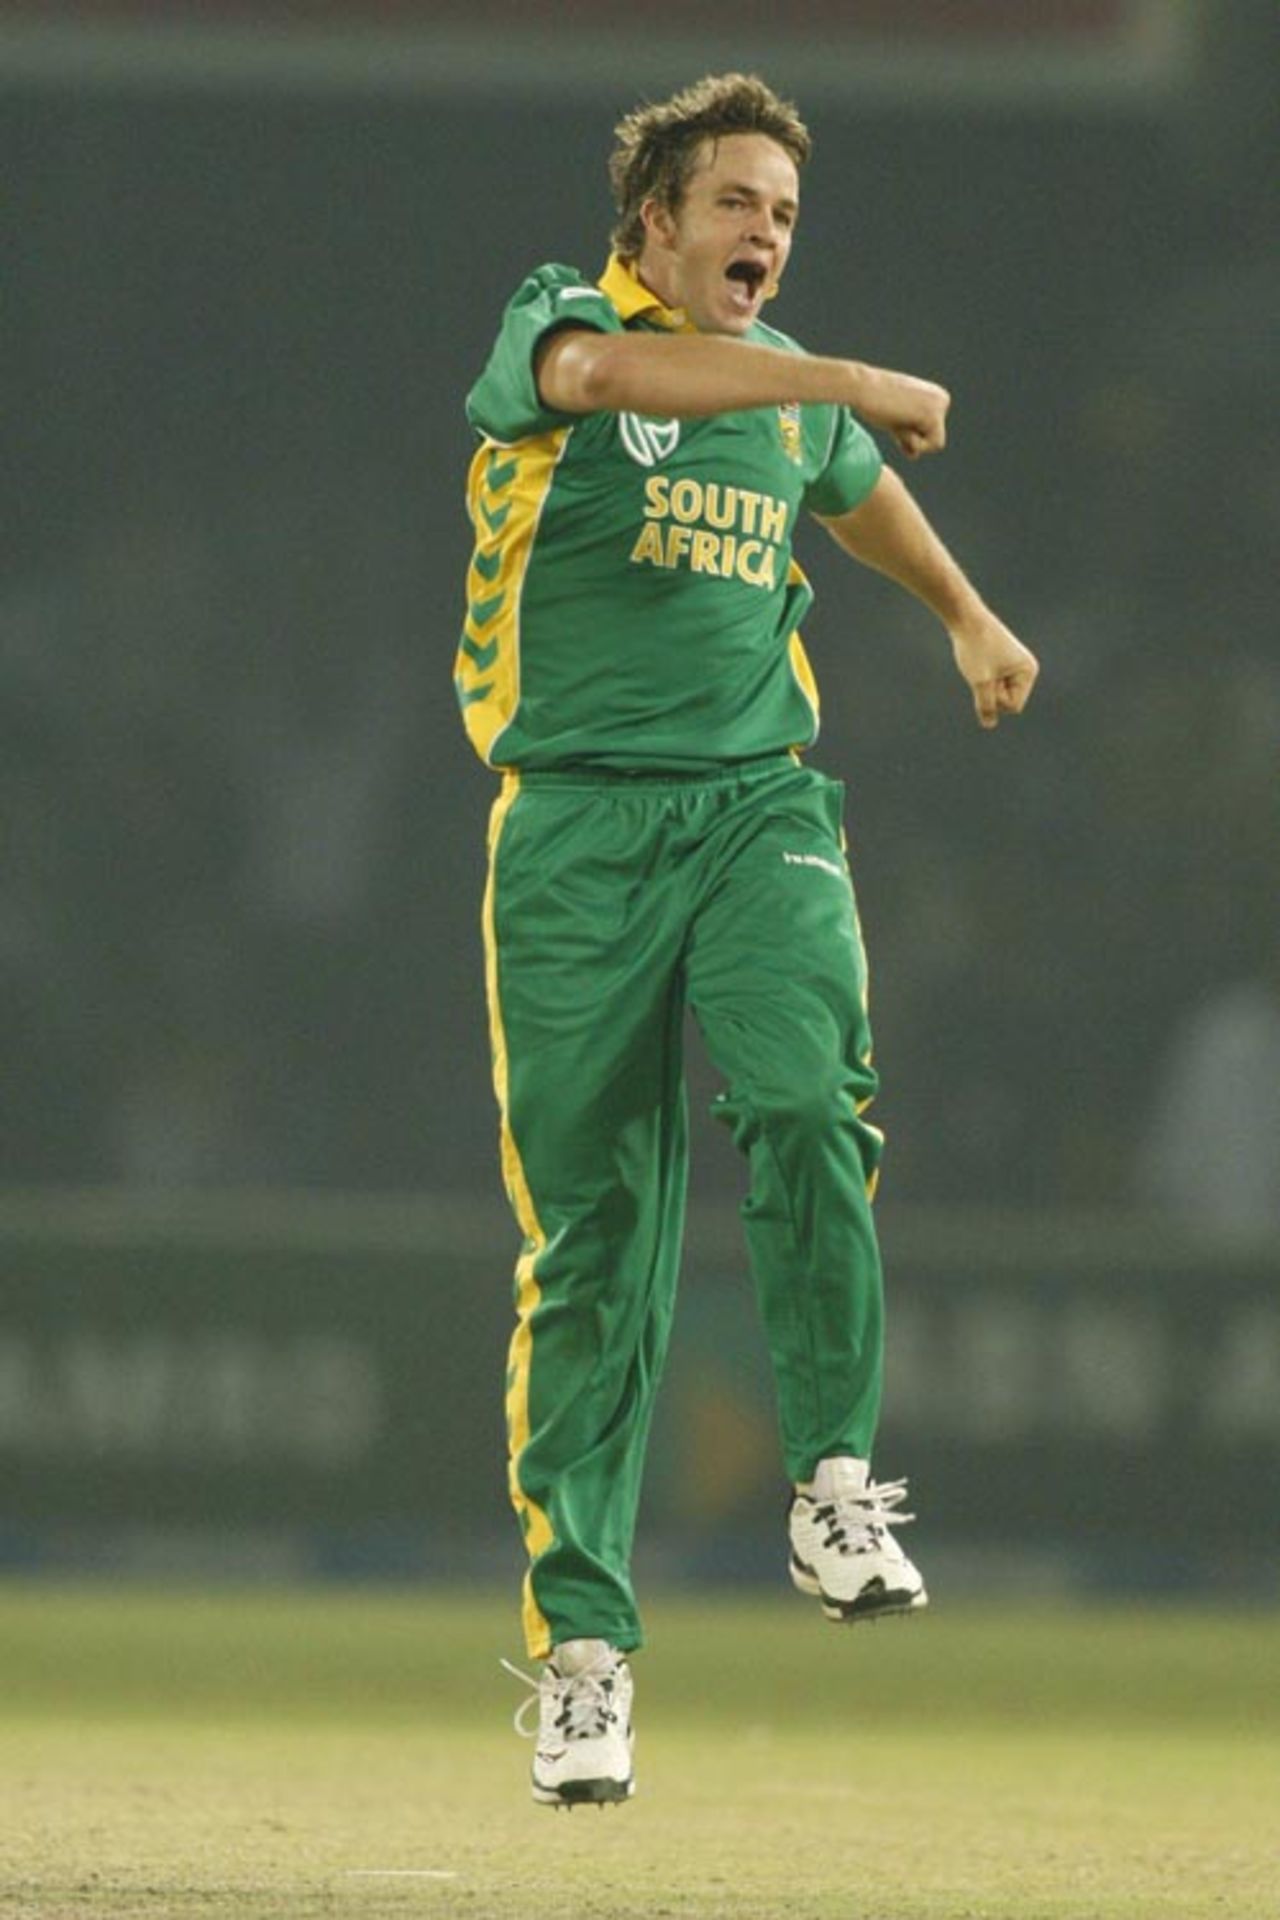 Albie Morkel celebrates one of his four wickets, Pakistan v South Africa, 5th ODI, Lahore, October 29, 2007 